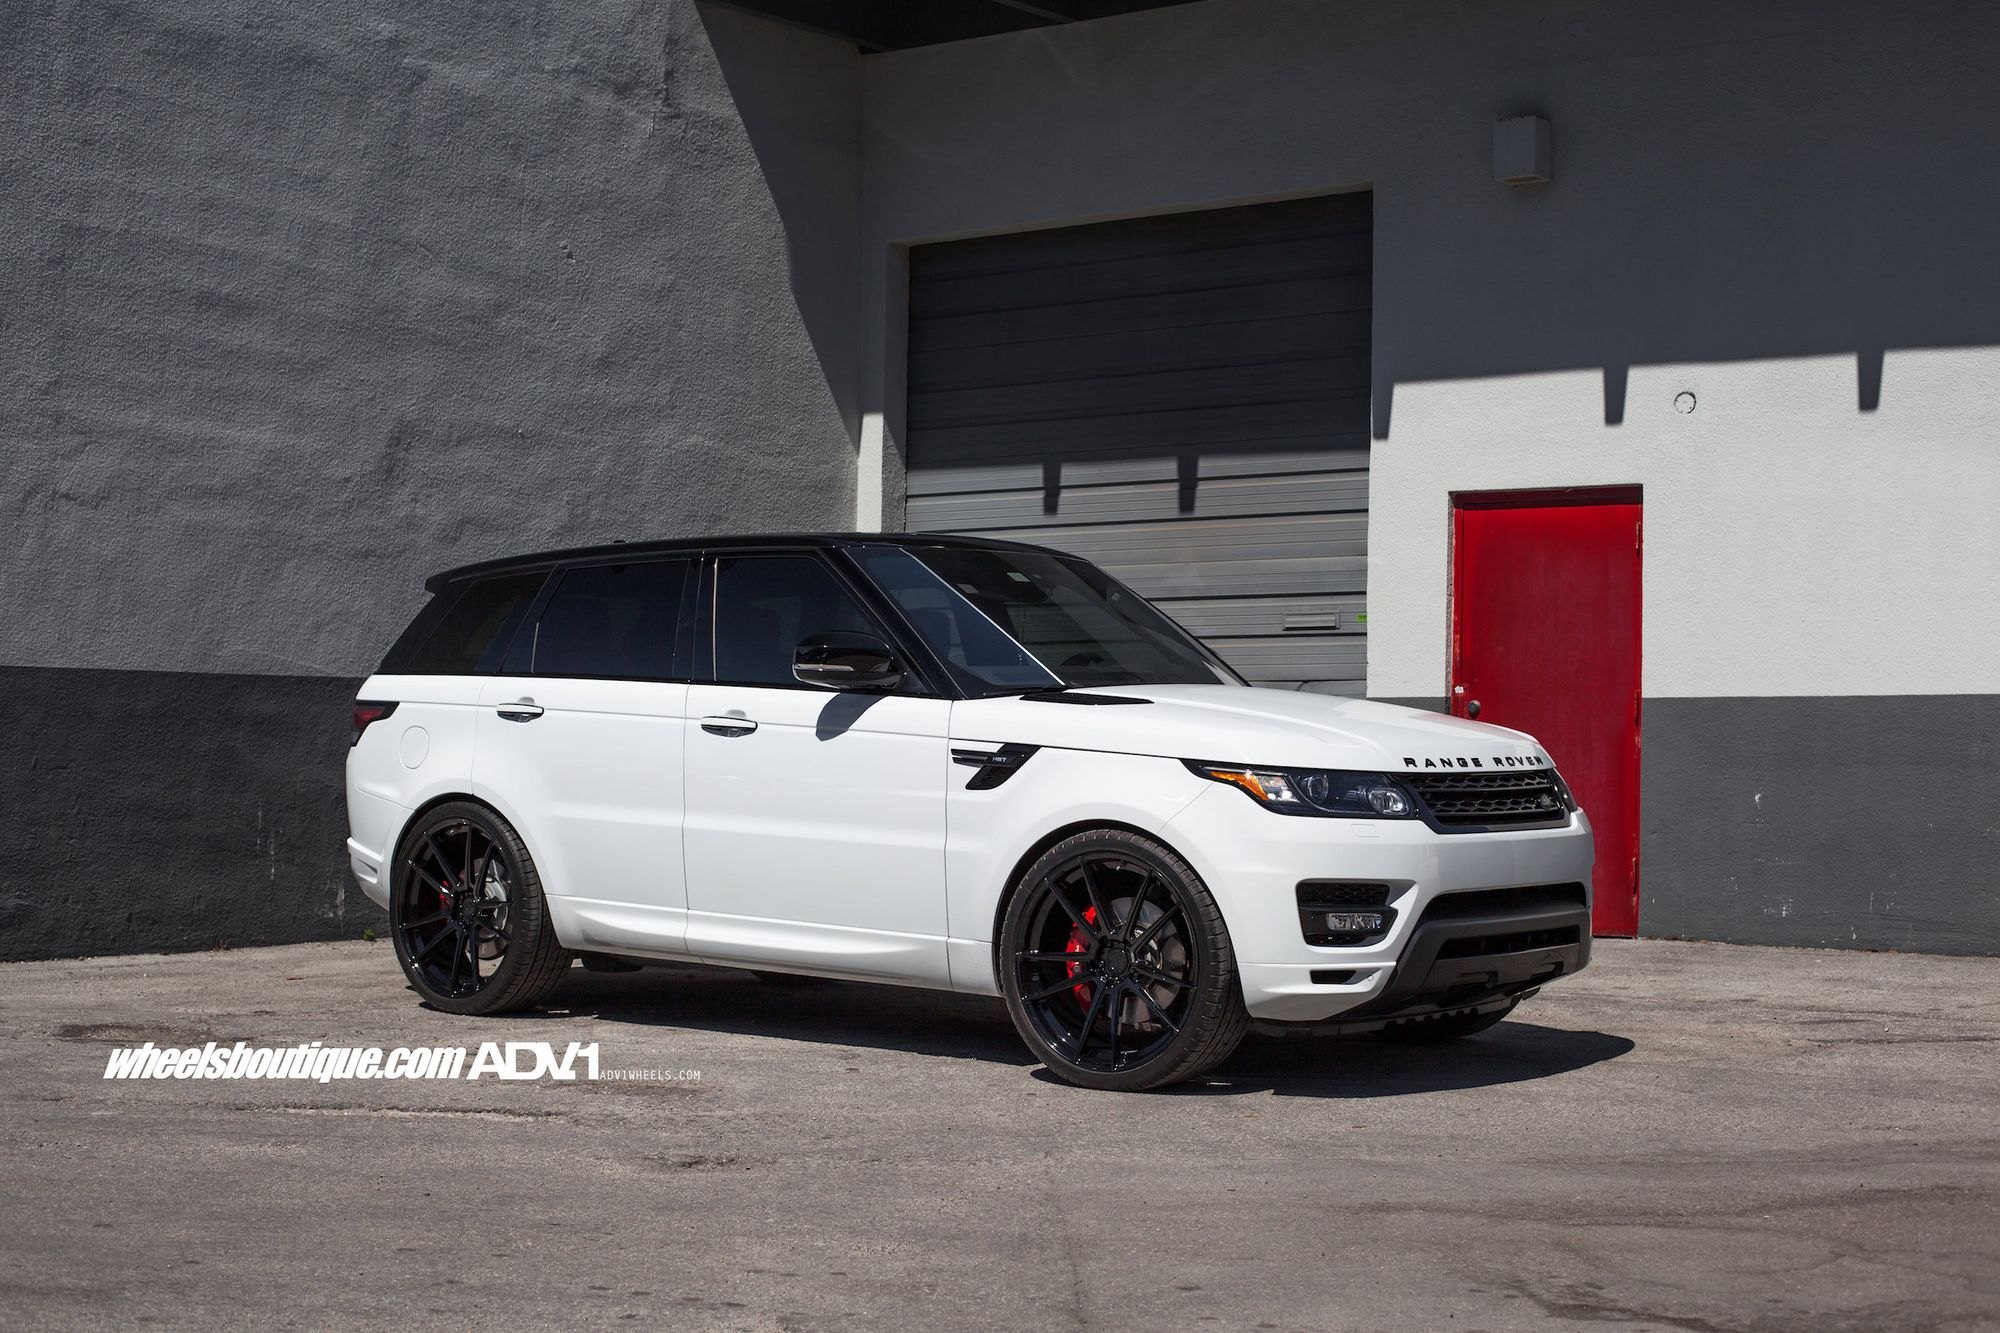 Aftermarket Projector Headlights on White Range Rover Sport - Photo by ADV.1